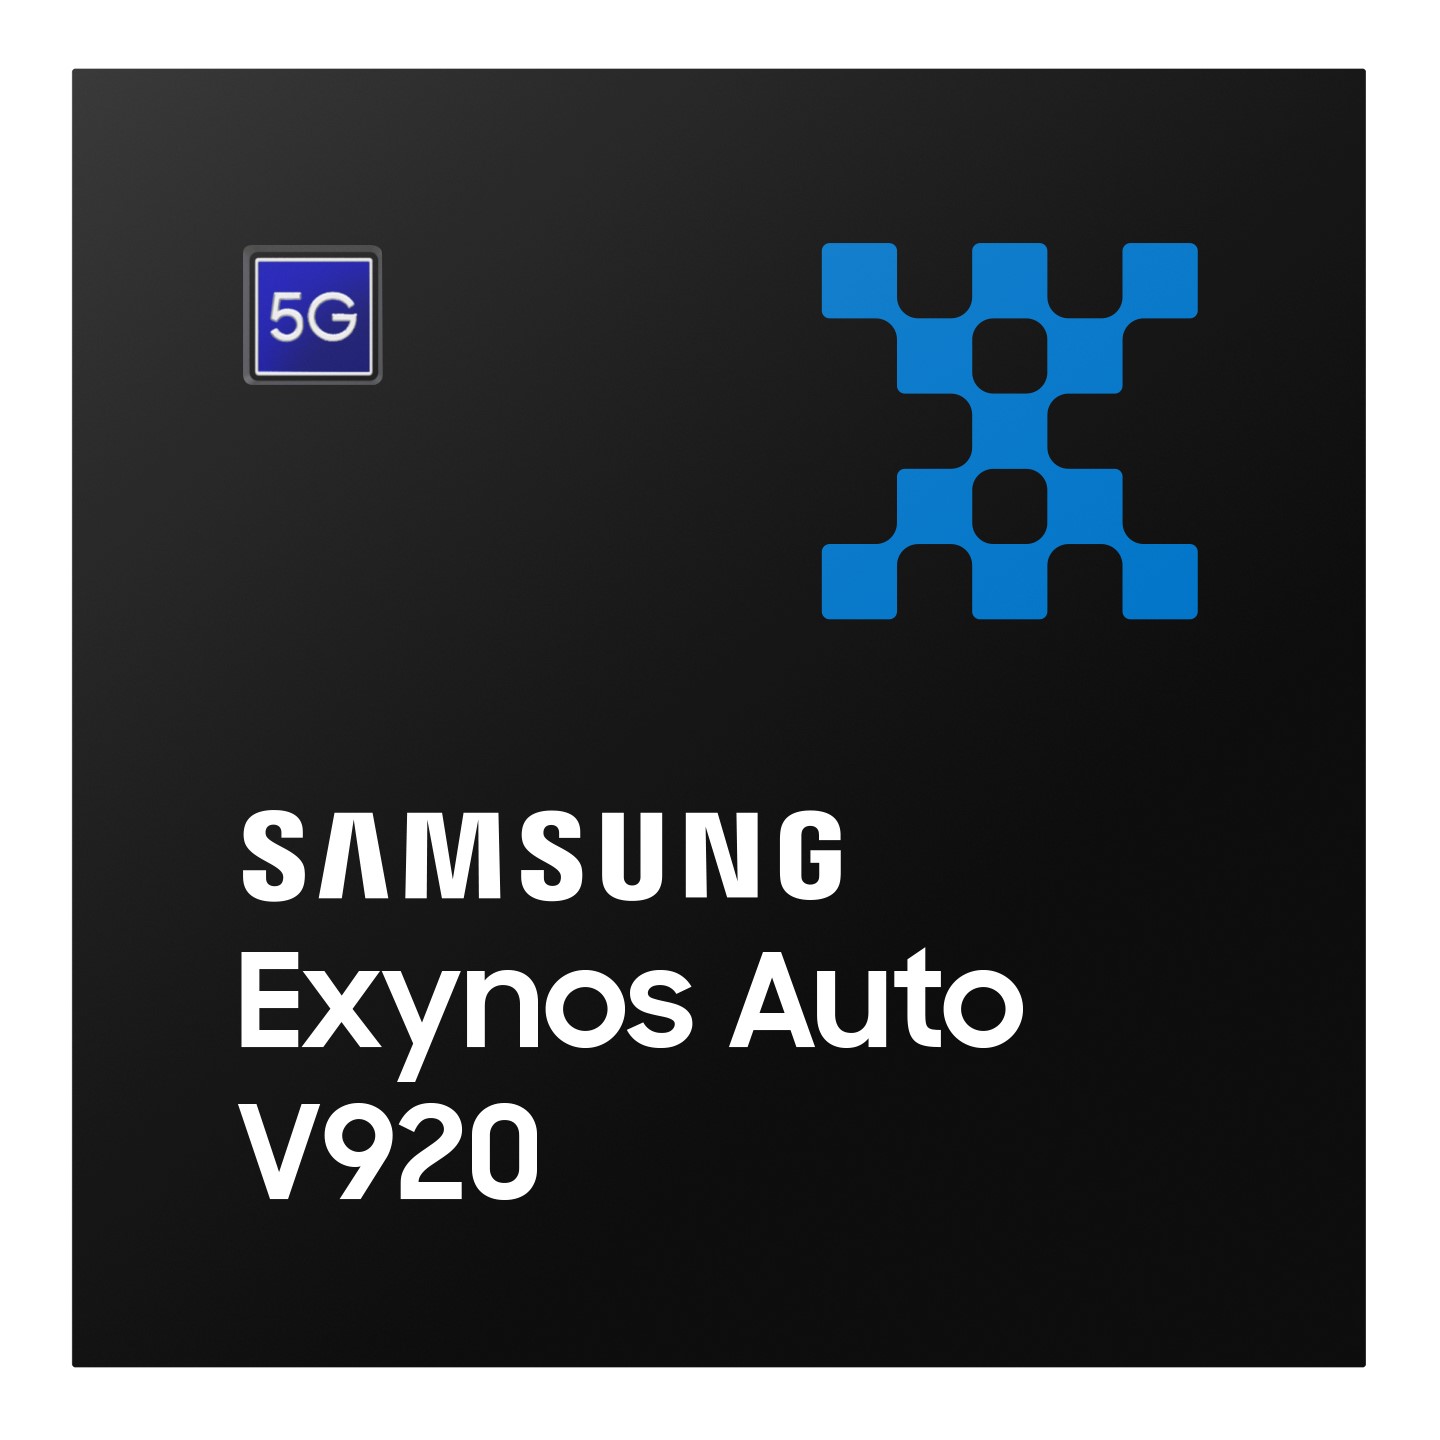 Hyundai’s next-gen in-vehicle infotainment systems will be powered by Samsung Exynos Auto V920 